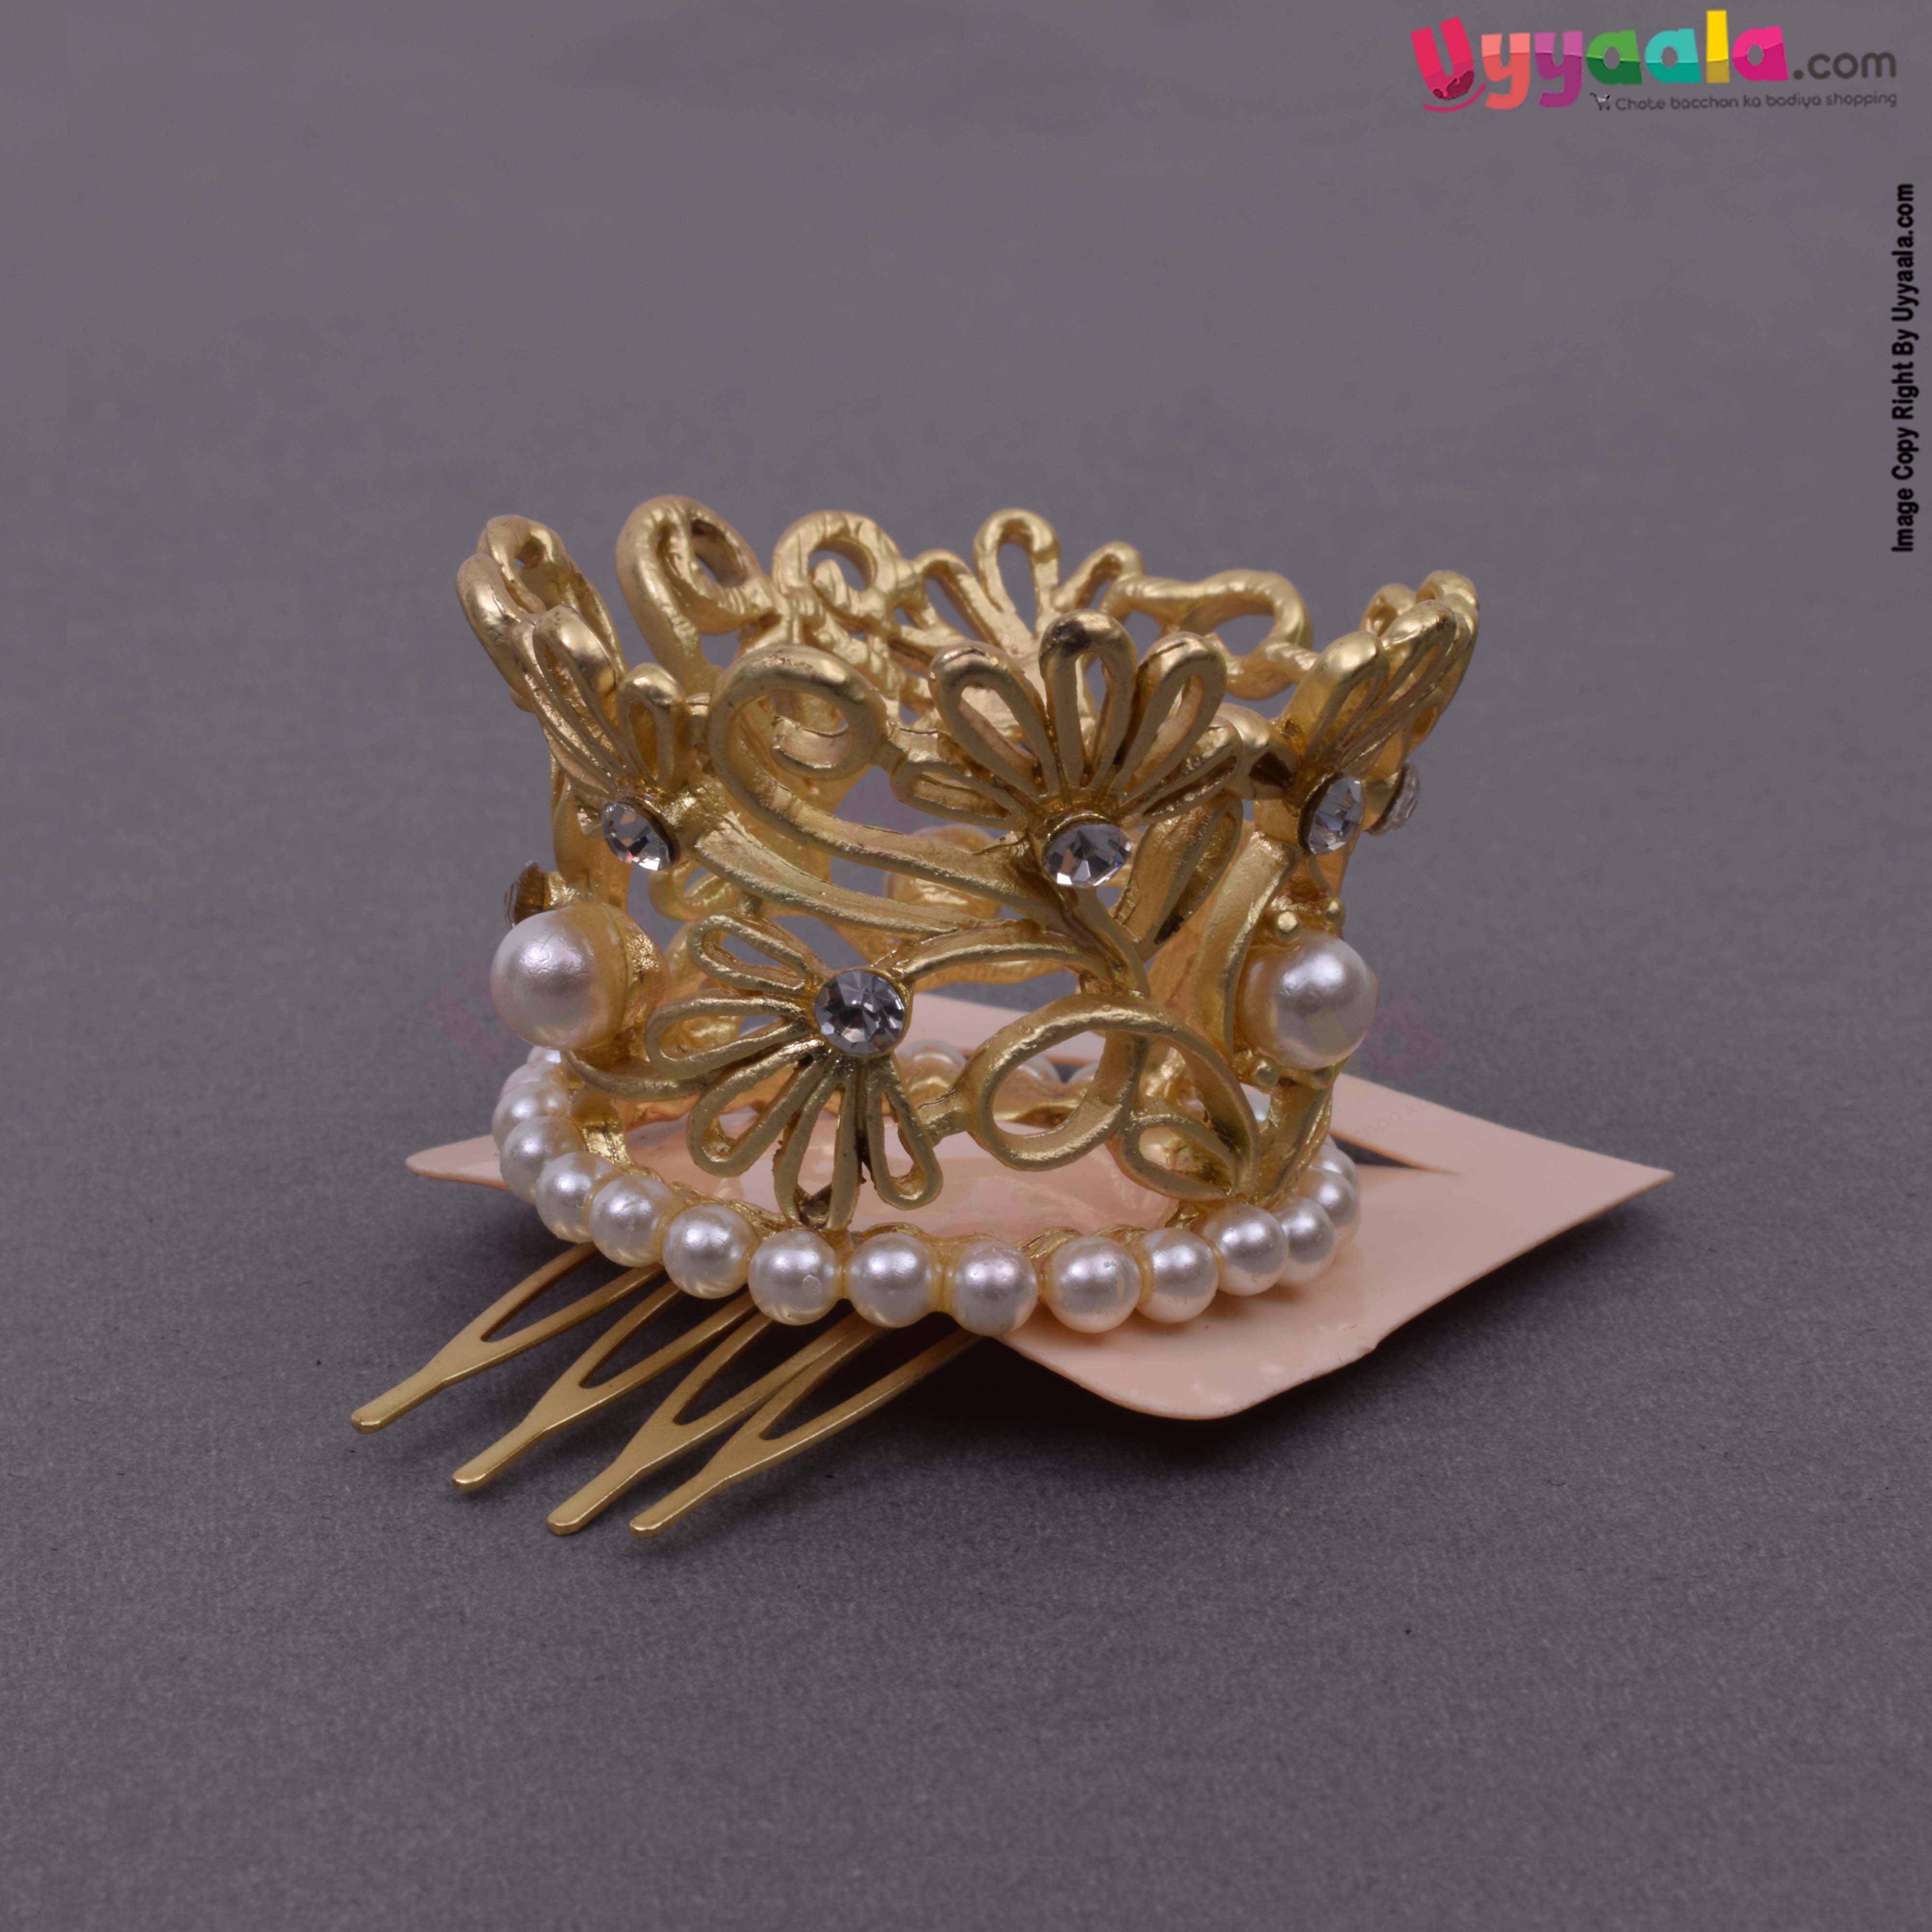 Fancy round hair crown pin with pearls for kids, gold